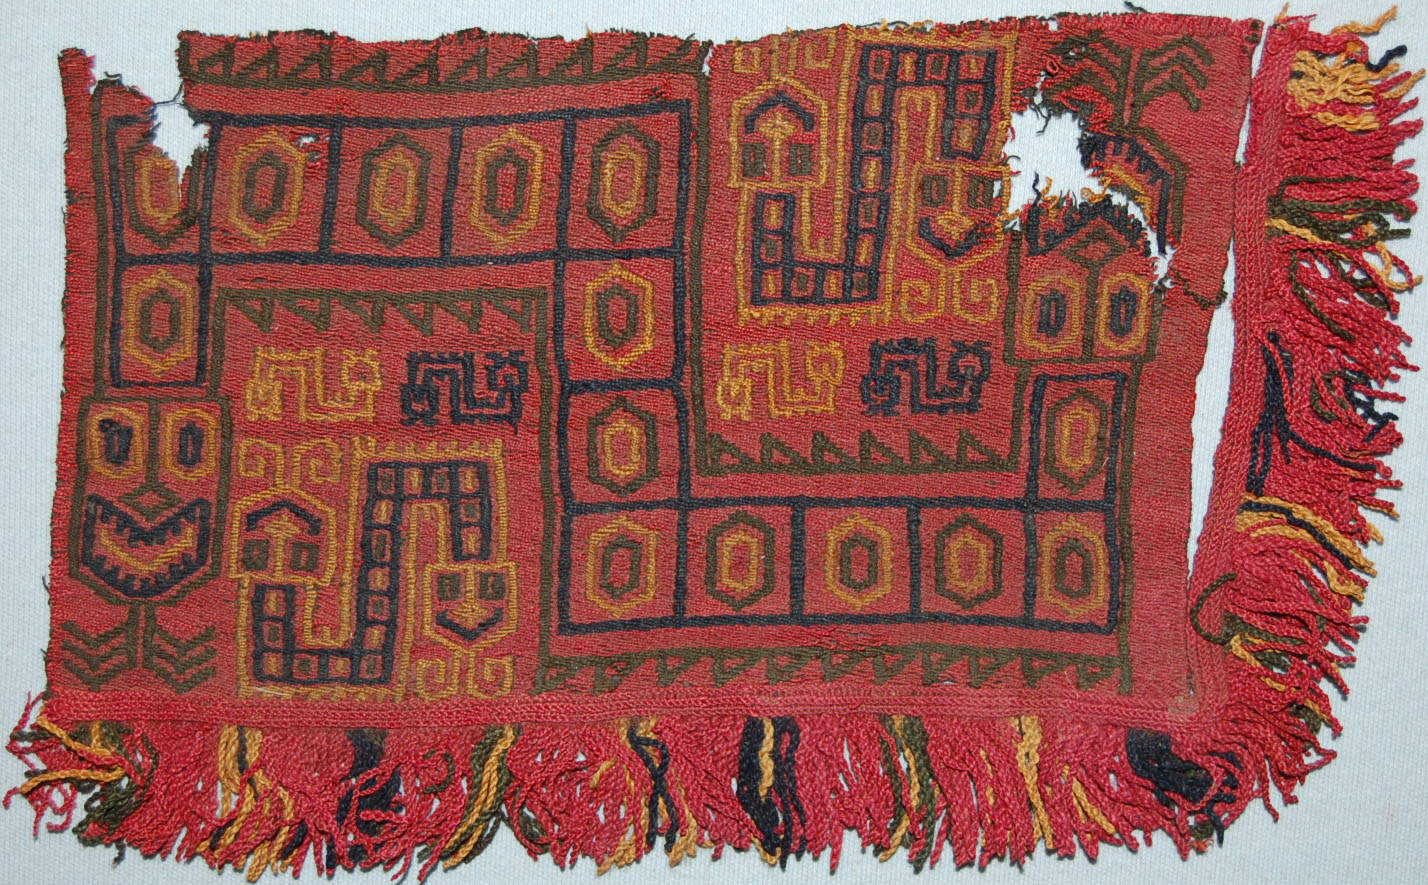 Paracas, detail of Linear Style embroidered mantle with serpentine Oculate Being, 1 - 500 C.E., cotton, camelid fiber, 11.5 x 19.5 cm excluding fringe (The British Museum, CC BY-NC-SA 4.0)